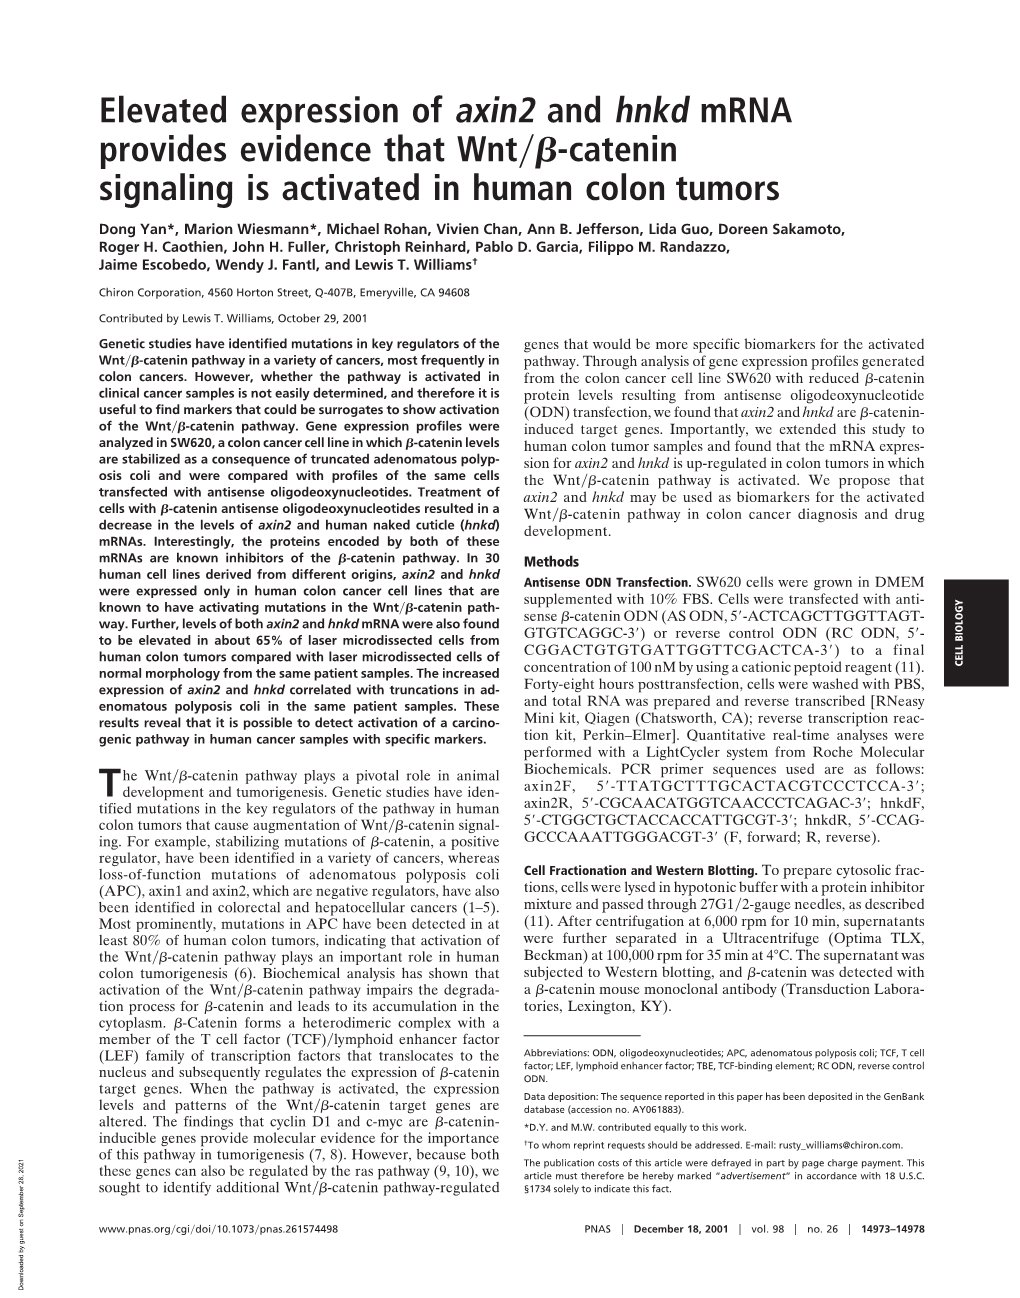 Elevated Expression of Axin2 and Hnkd Mrna Provides Evidence That Wnt͞␤-Catenin Signaling Is Activated in Human Colon Tumors